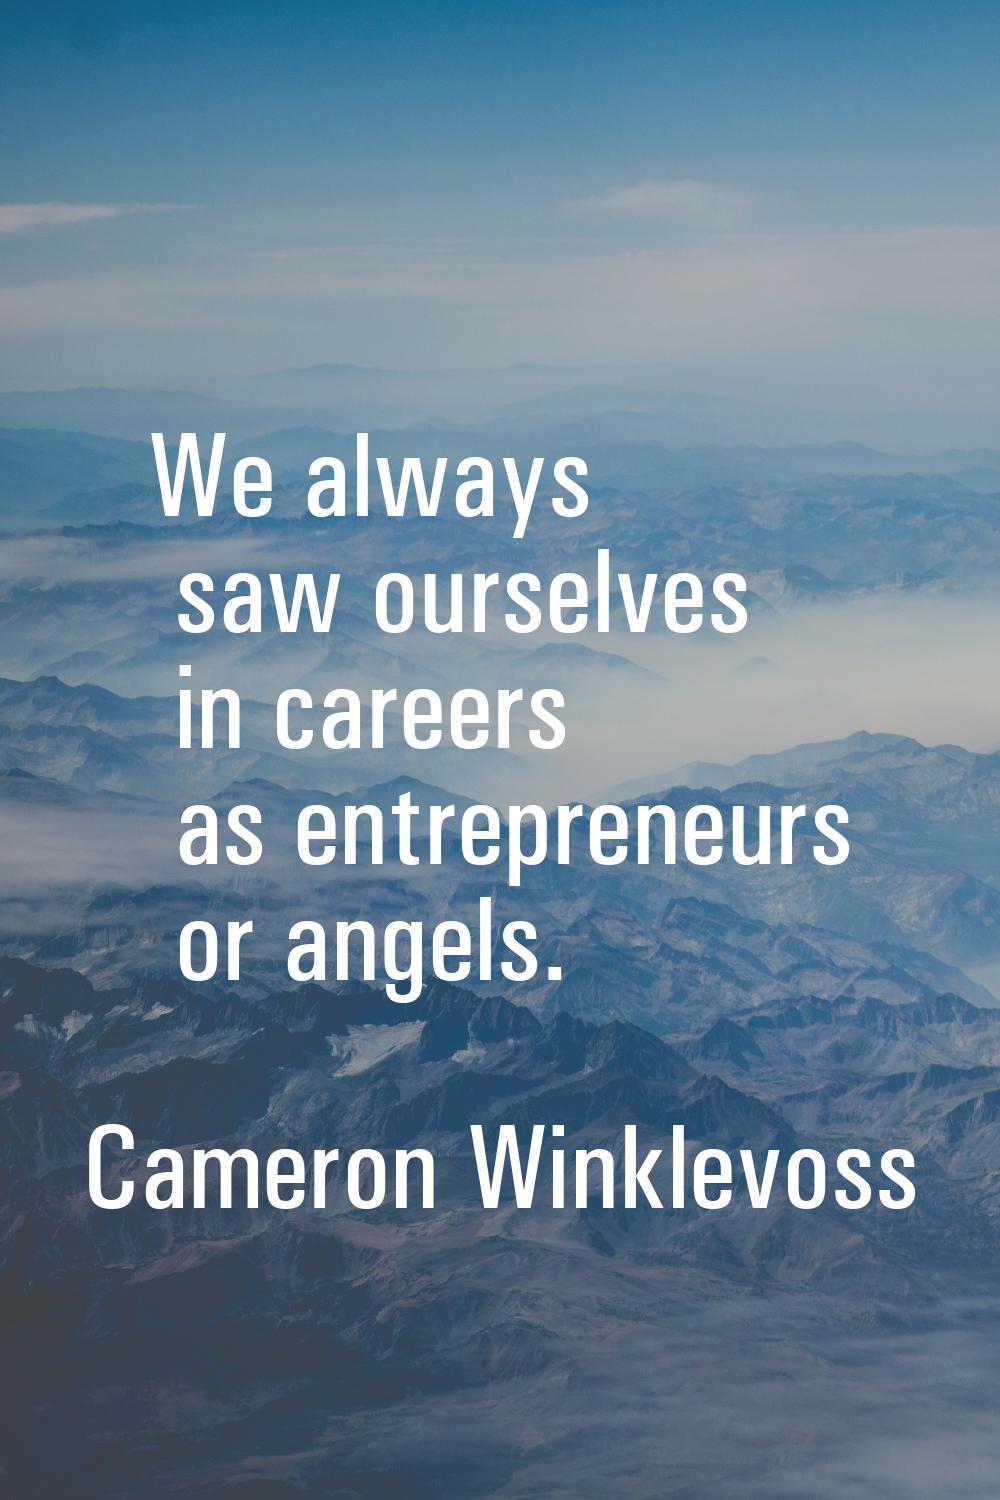 We always saw ourselves in careers as entrepreneurs or angels.